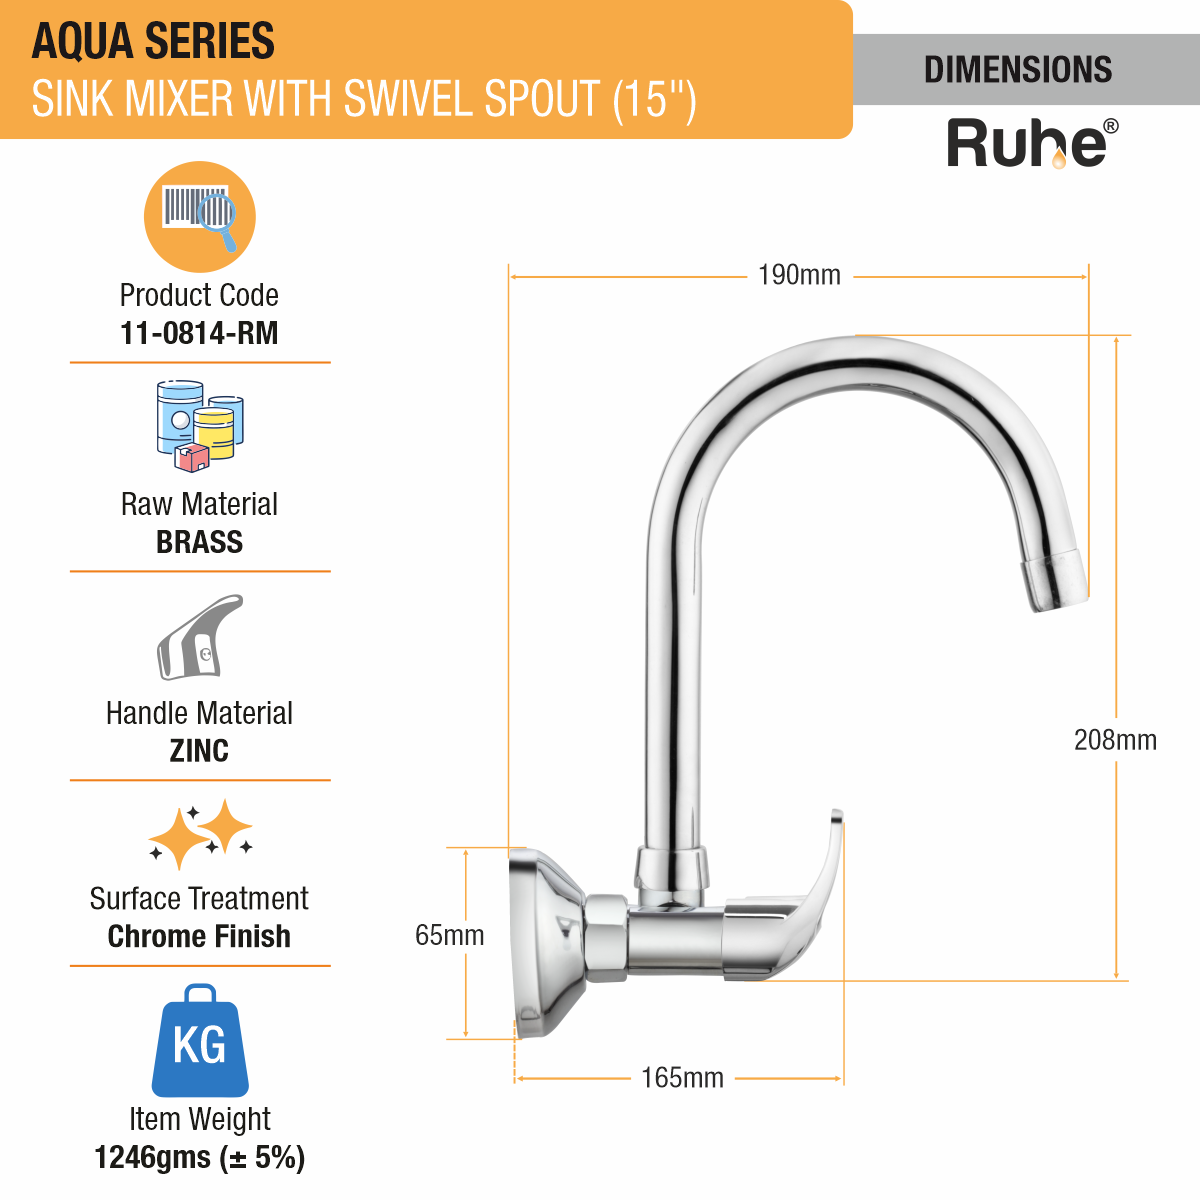 Aqua Sink Mixer with Medium (15 inches) Round Swivel Spout Faucet dimensions and size